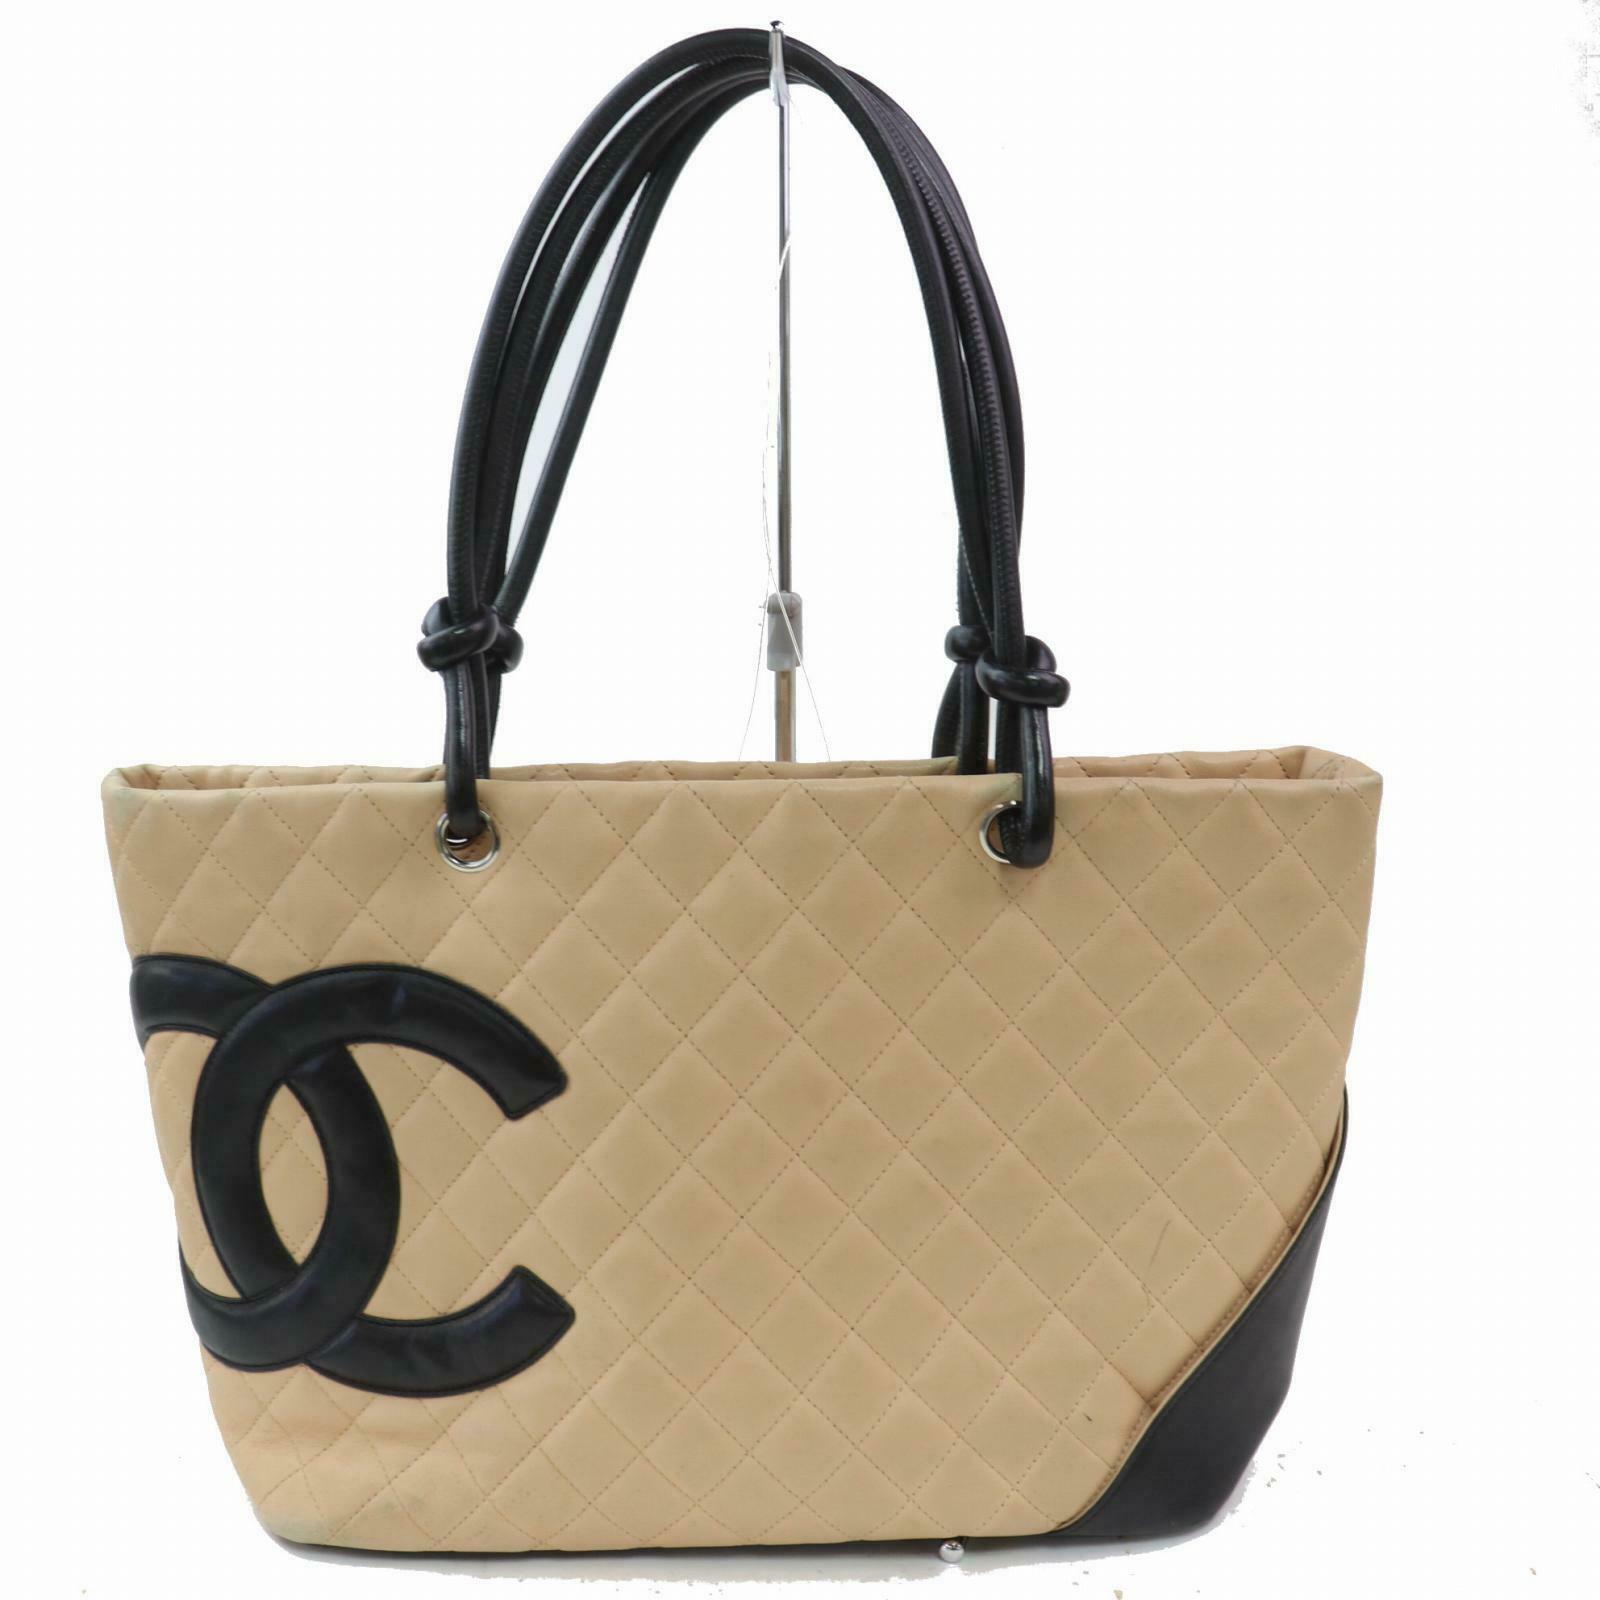 Purchase Result  Chanel Cambon Tote Bag